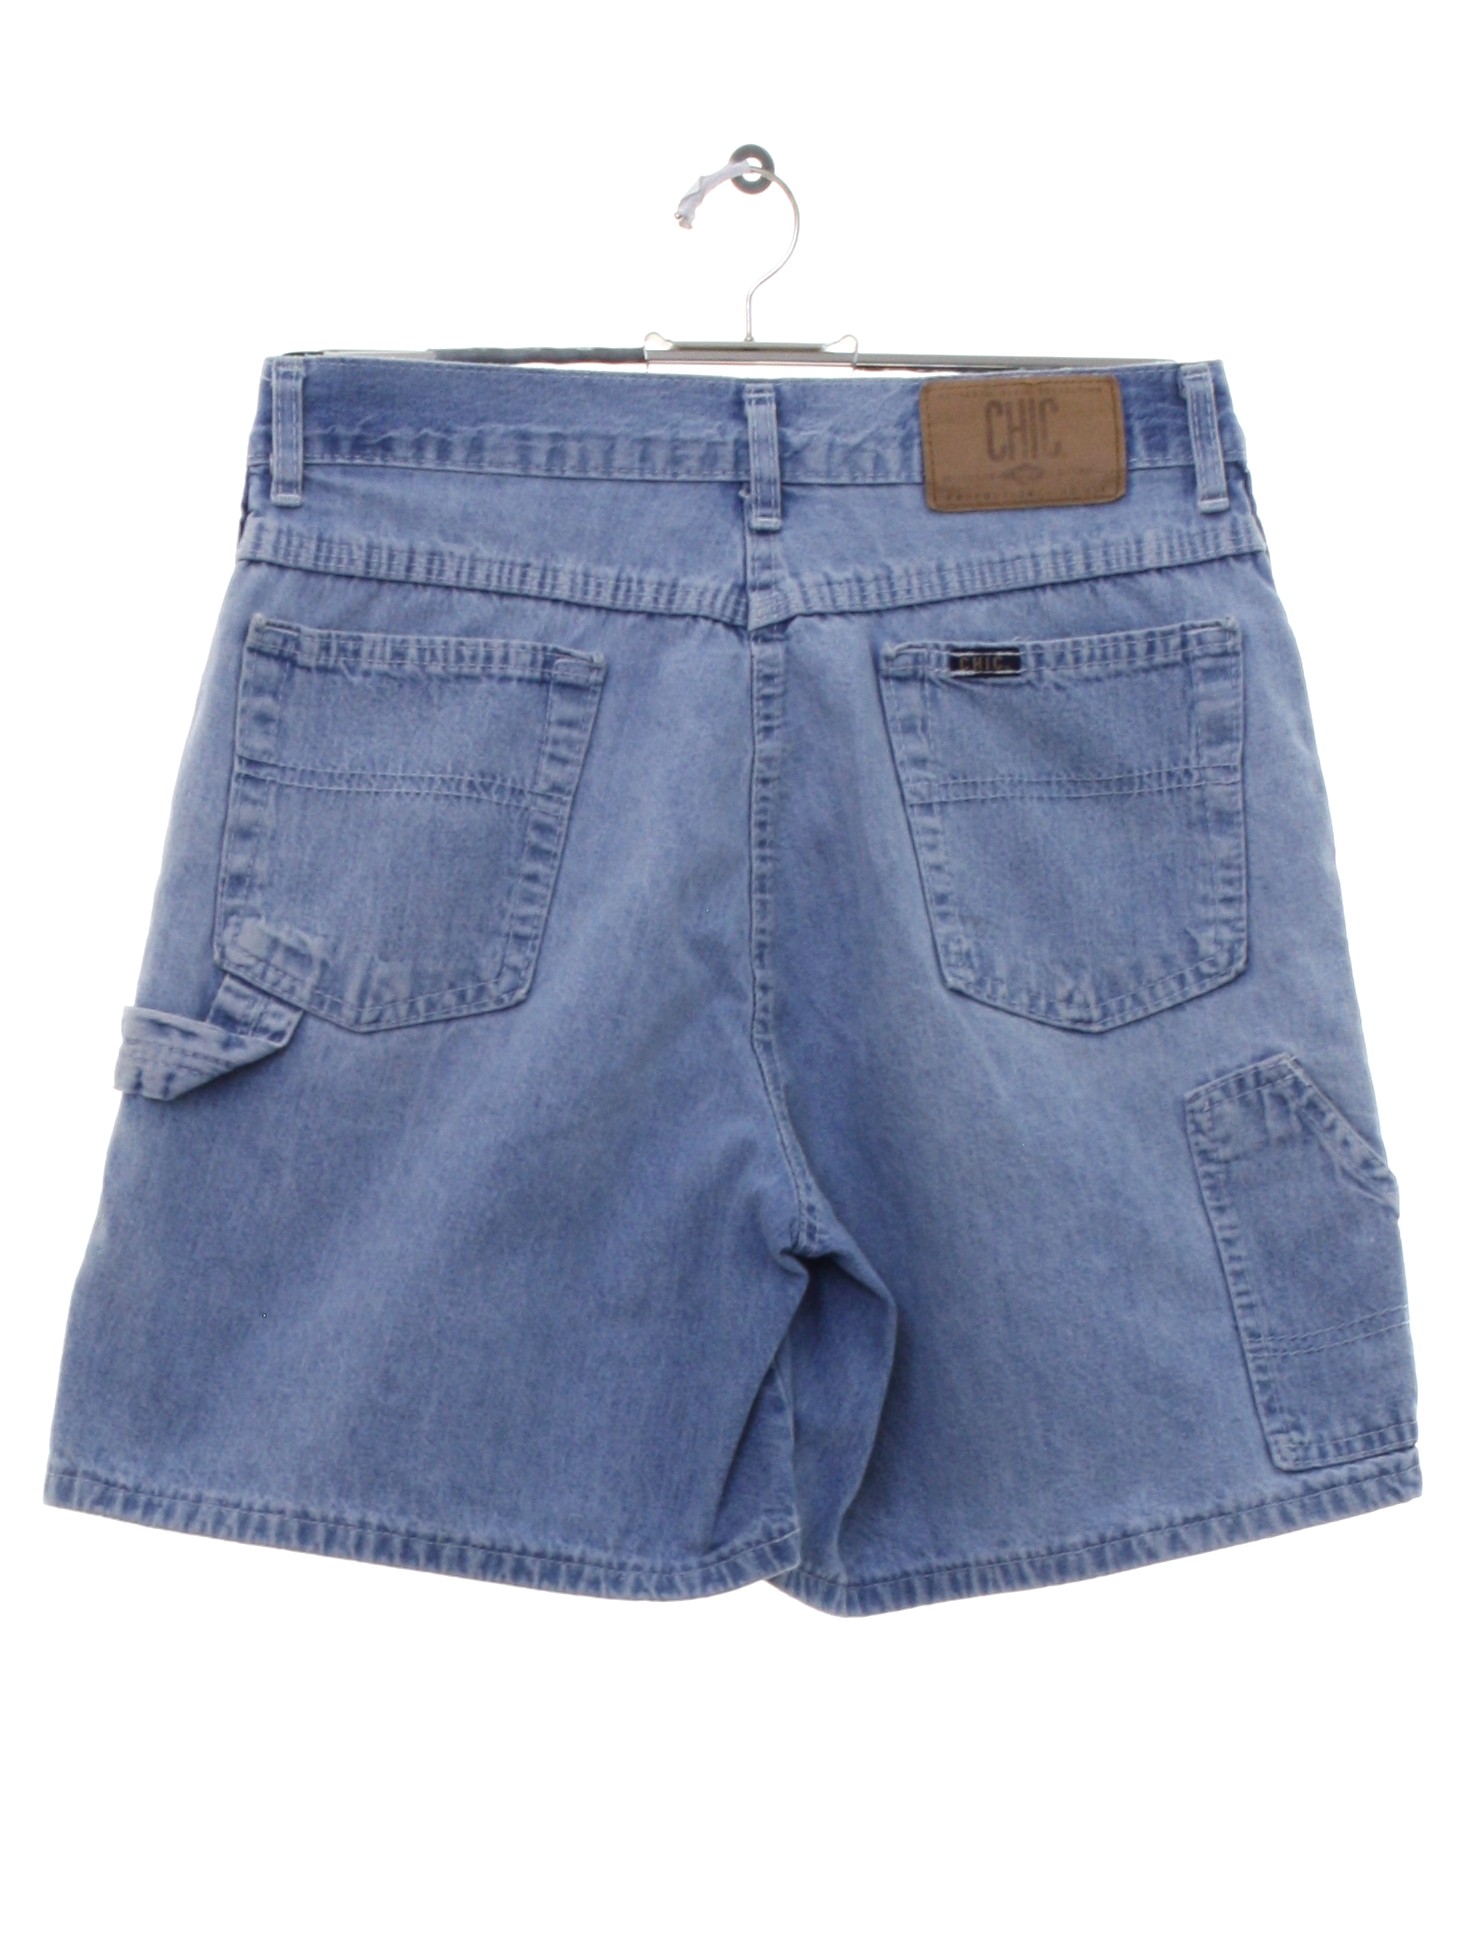 90s Vintage Chic Shorts: 90s -Chic- Womens faded blue polyester cotton ...